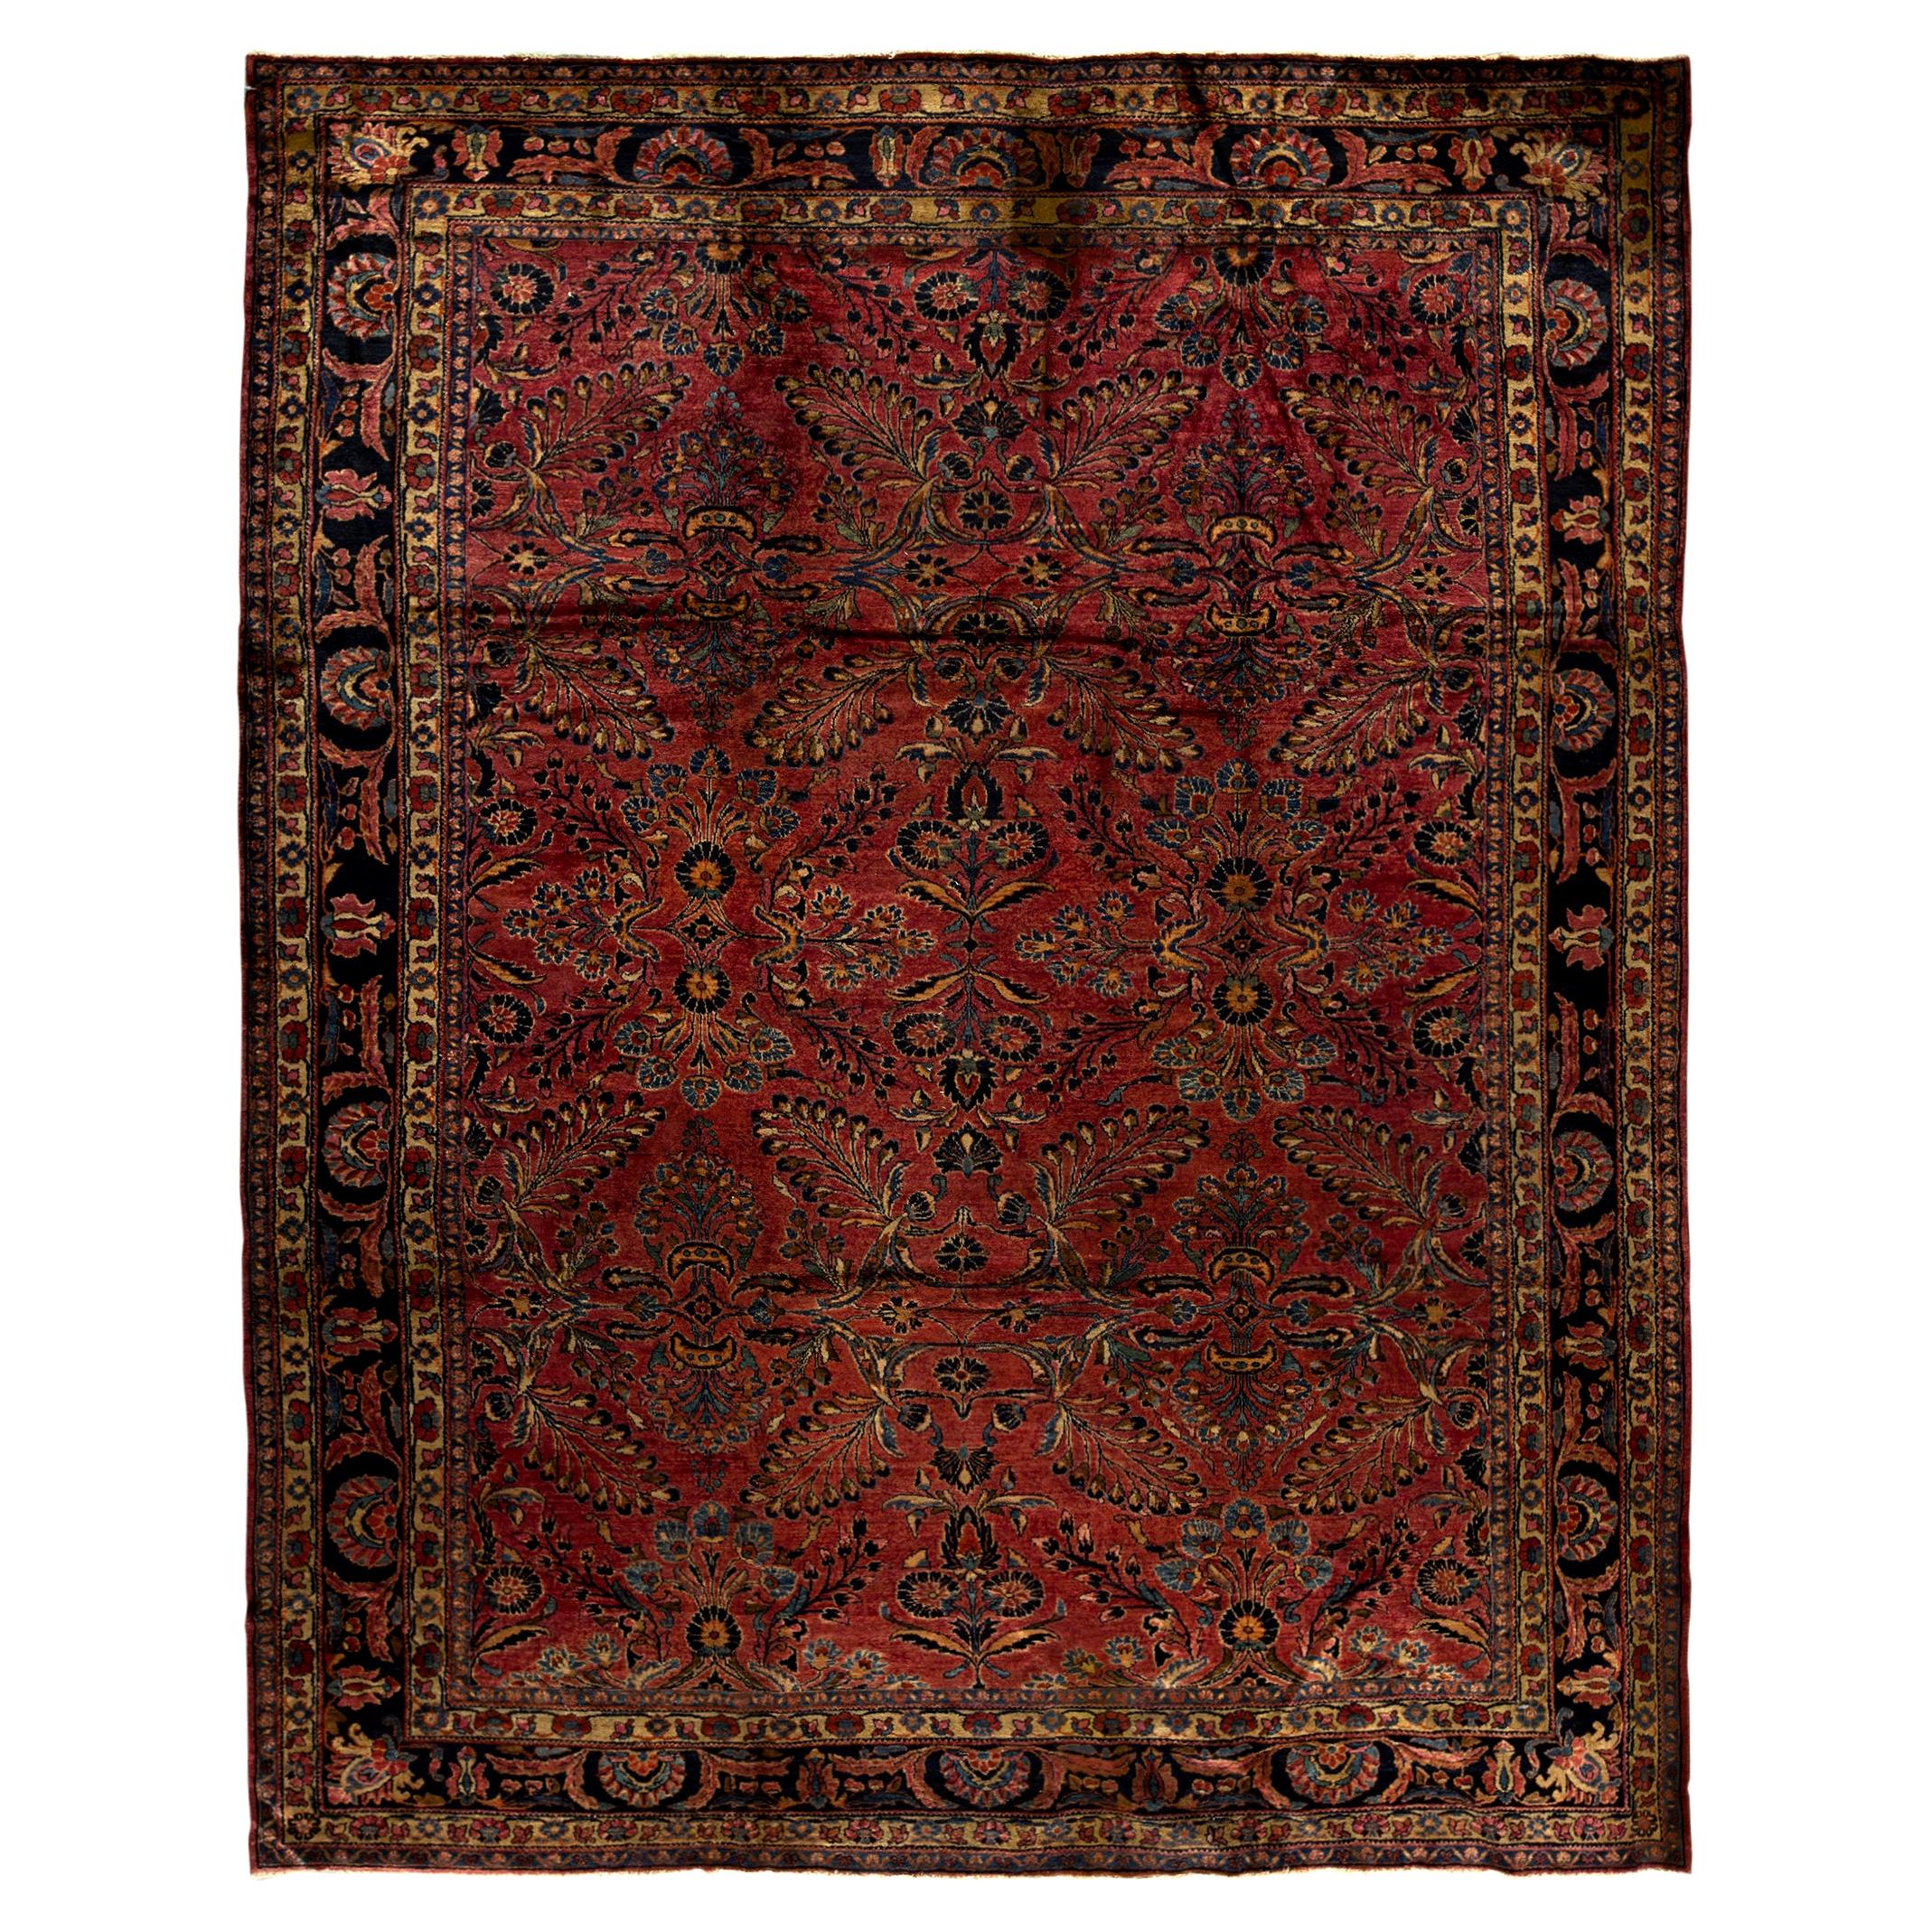  Antique Persian Fine Traditional Handwoven Luxury Wool Red / Navy Rug